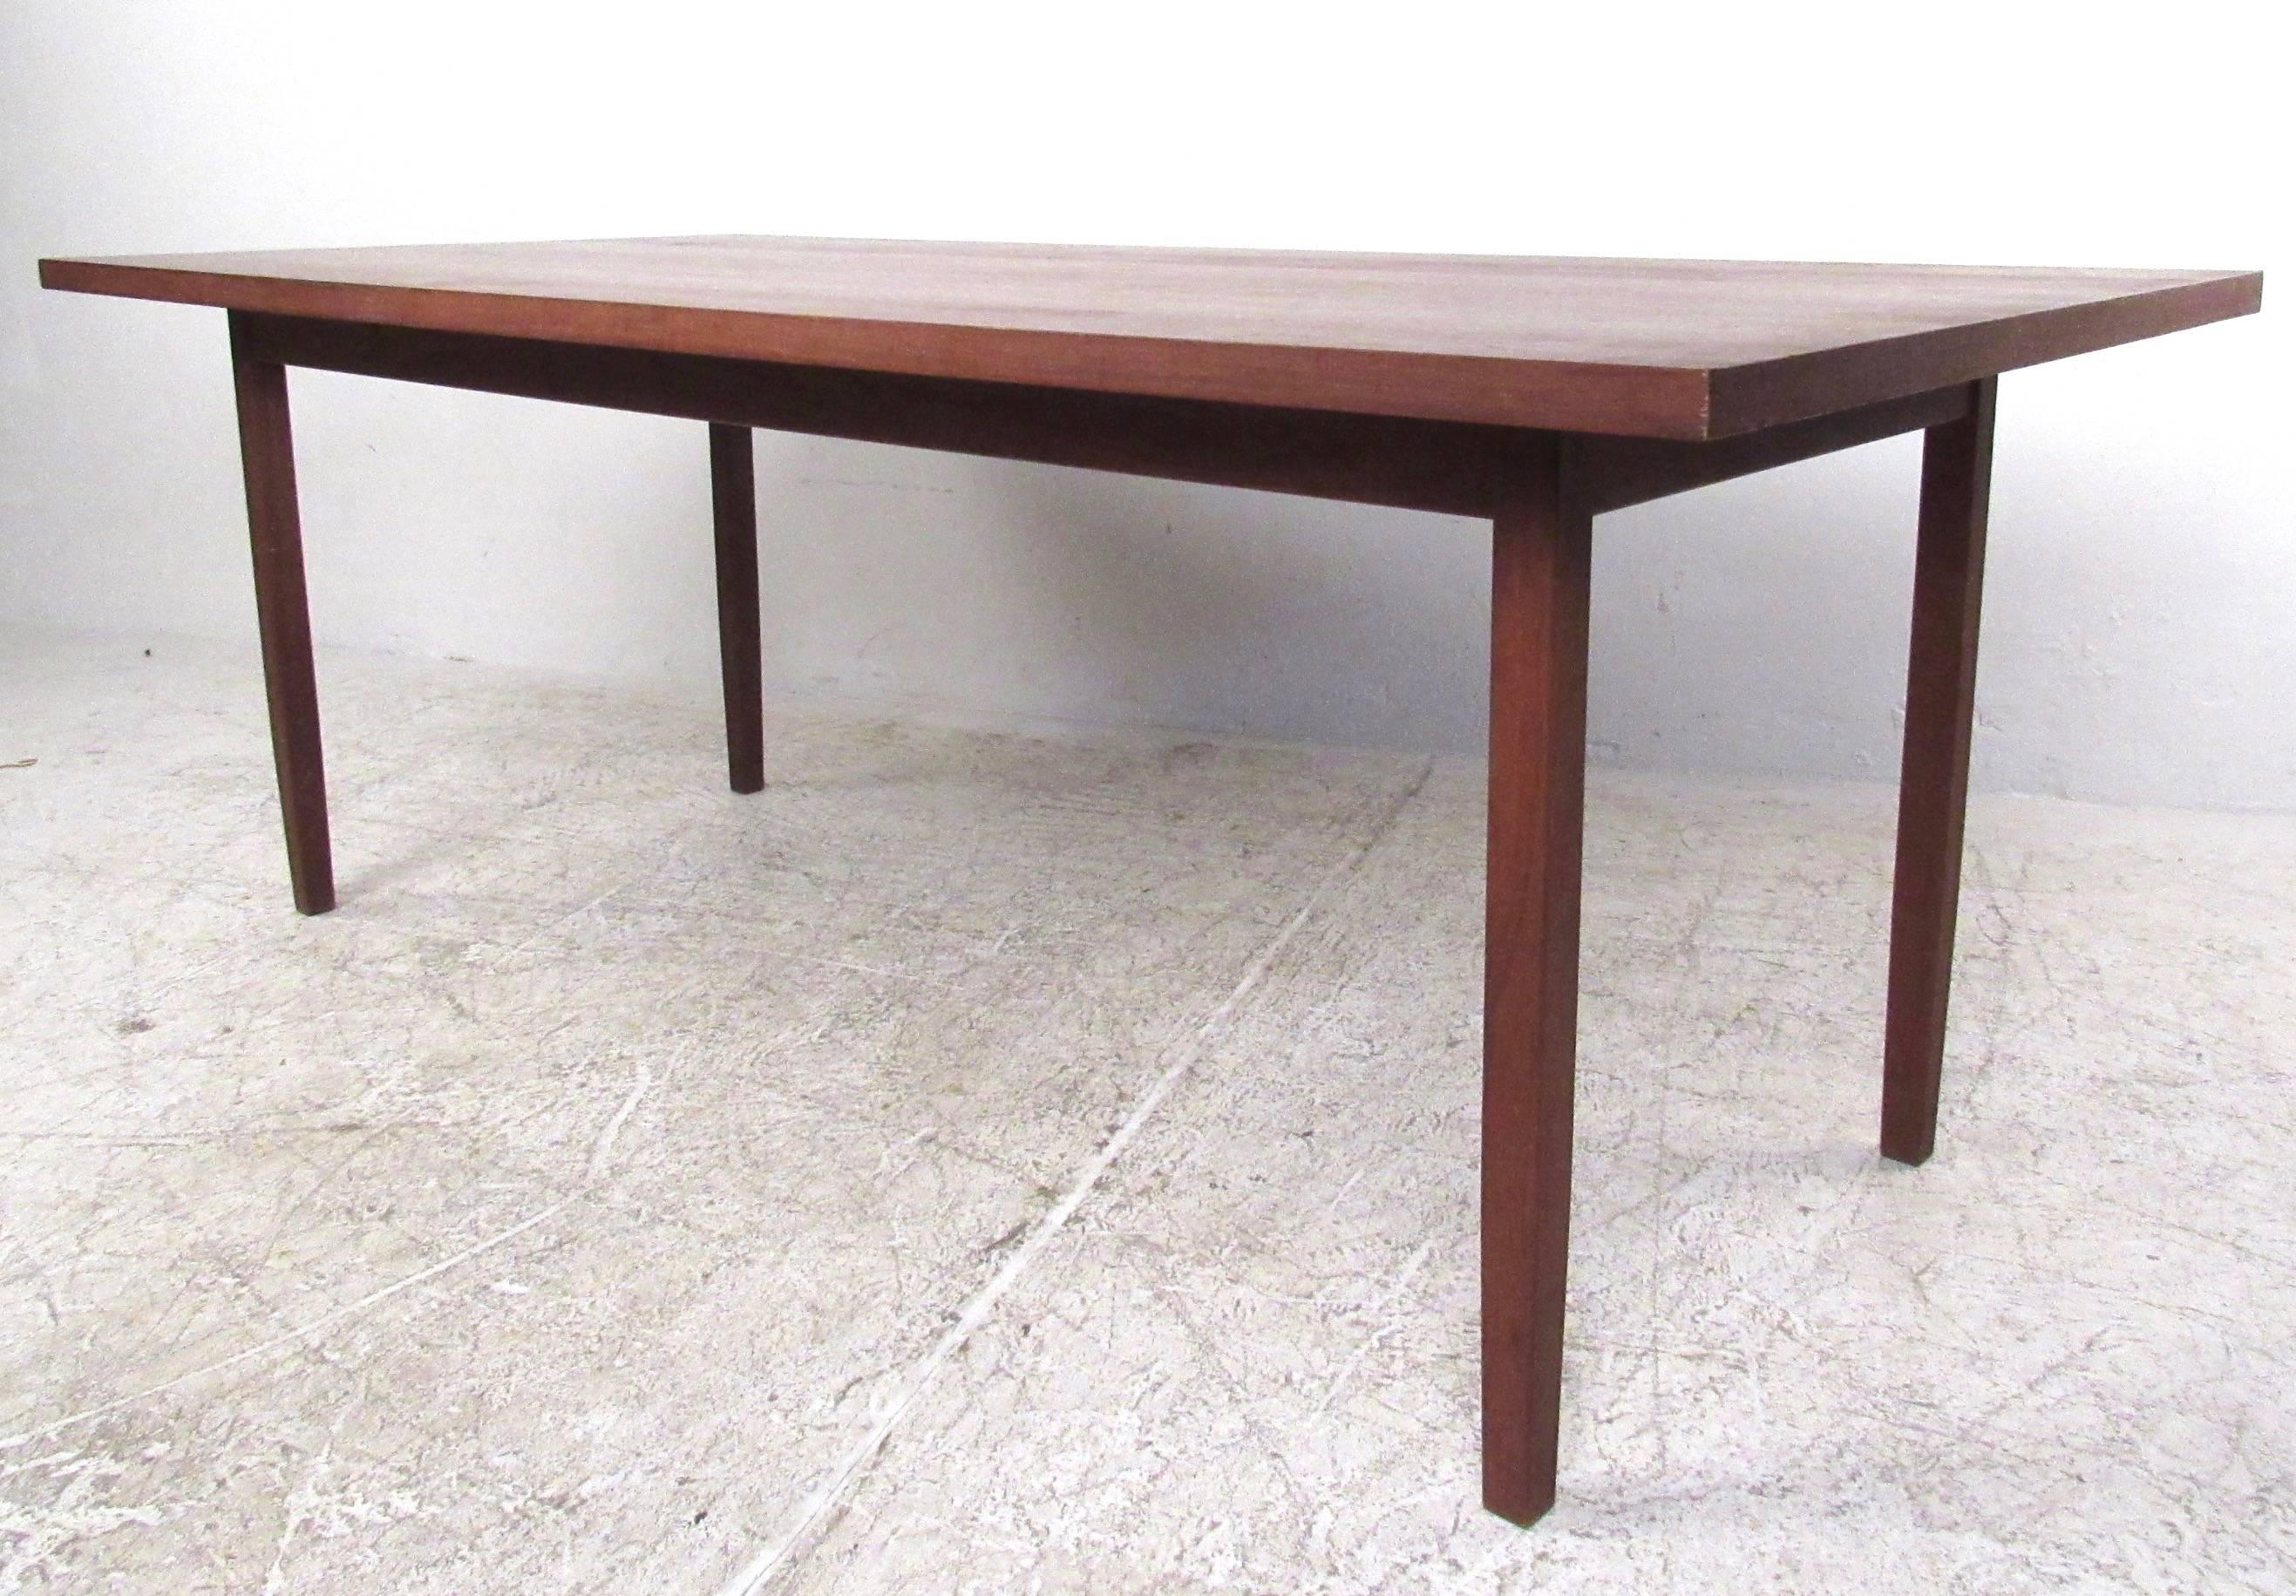 This unique Mid-Century Modern dining table by Knoll International features a vintage walnut finish, and a spacious tabletop perfect for large meals and hosting. Please confirm item location (NY or NJ).